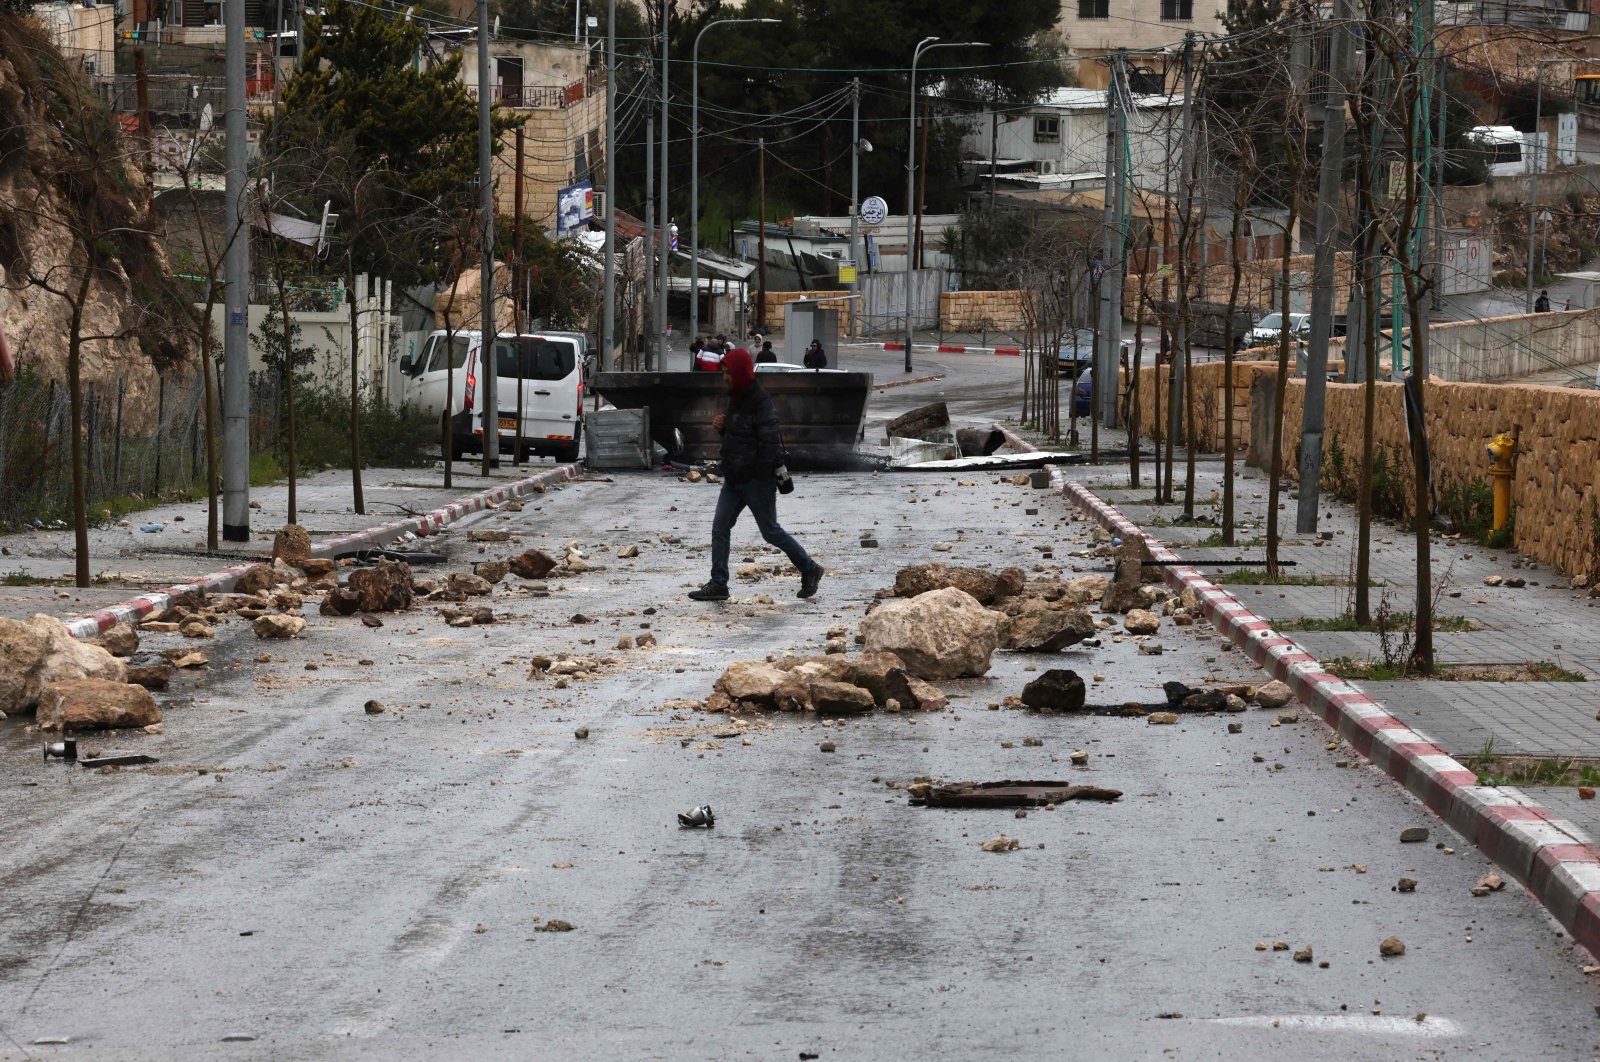 A Palestinian man crosses a blocked street during a strike against house demotions by Israeli authorities in the east Jerusalem neighborhood of Jabal Mukaber, Jan. 31, 2023. (AFP Photo)